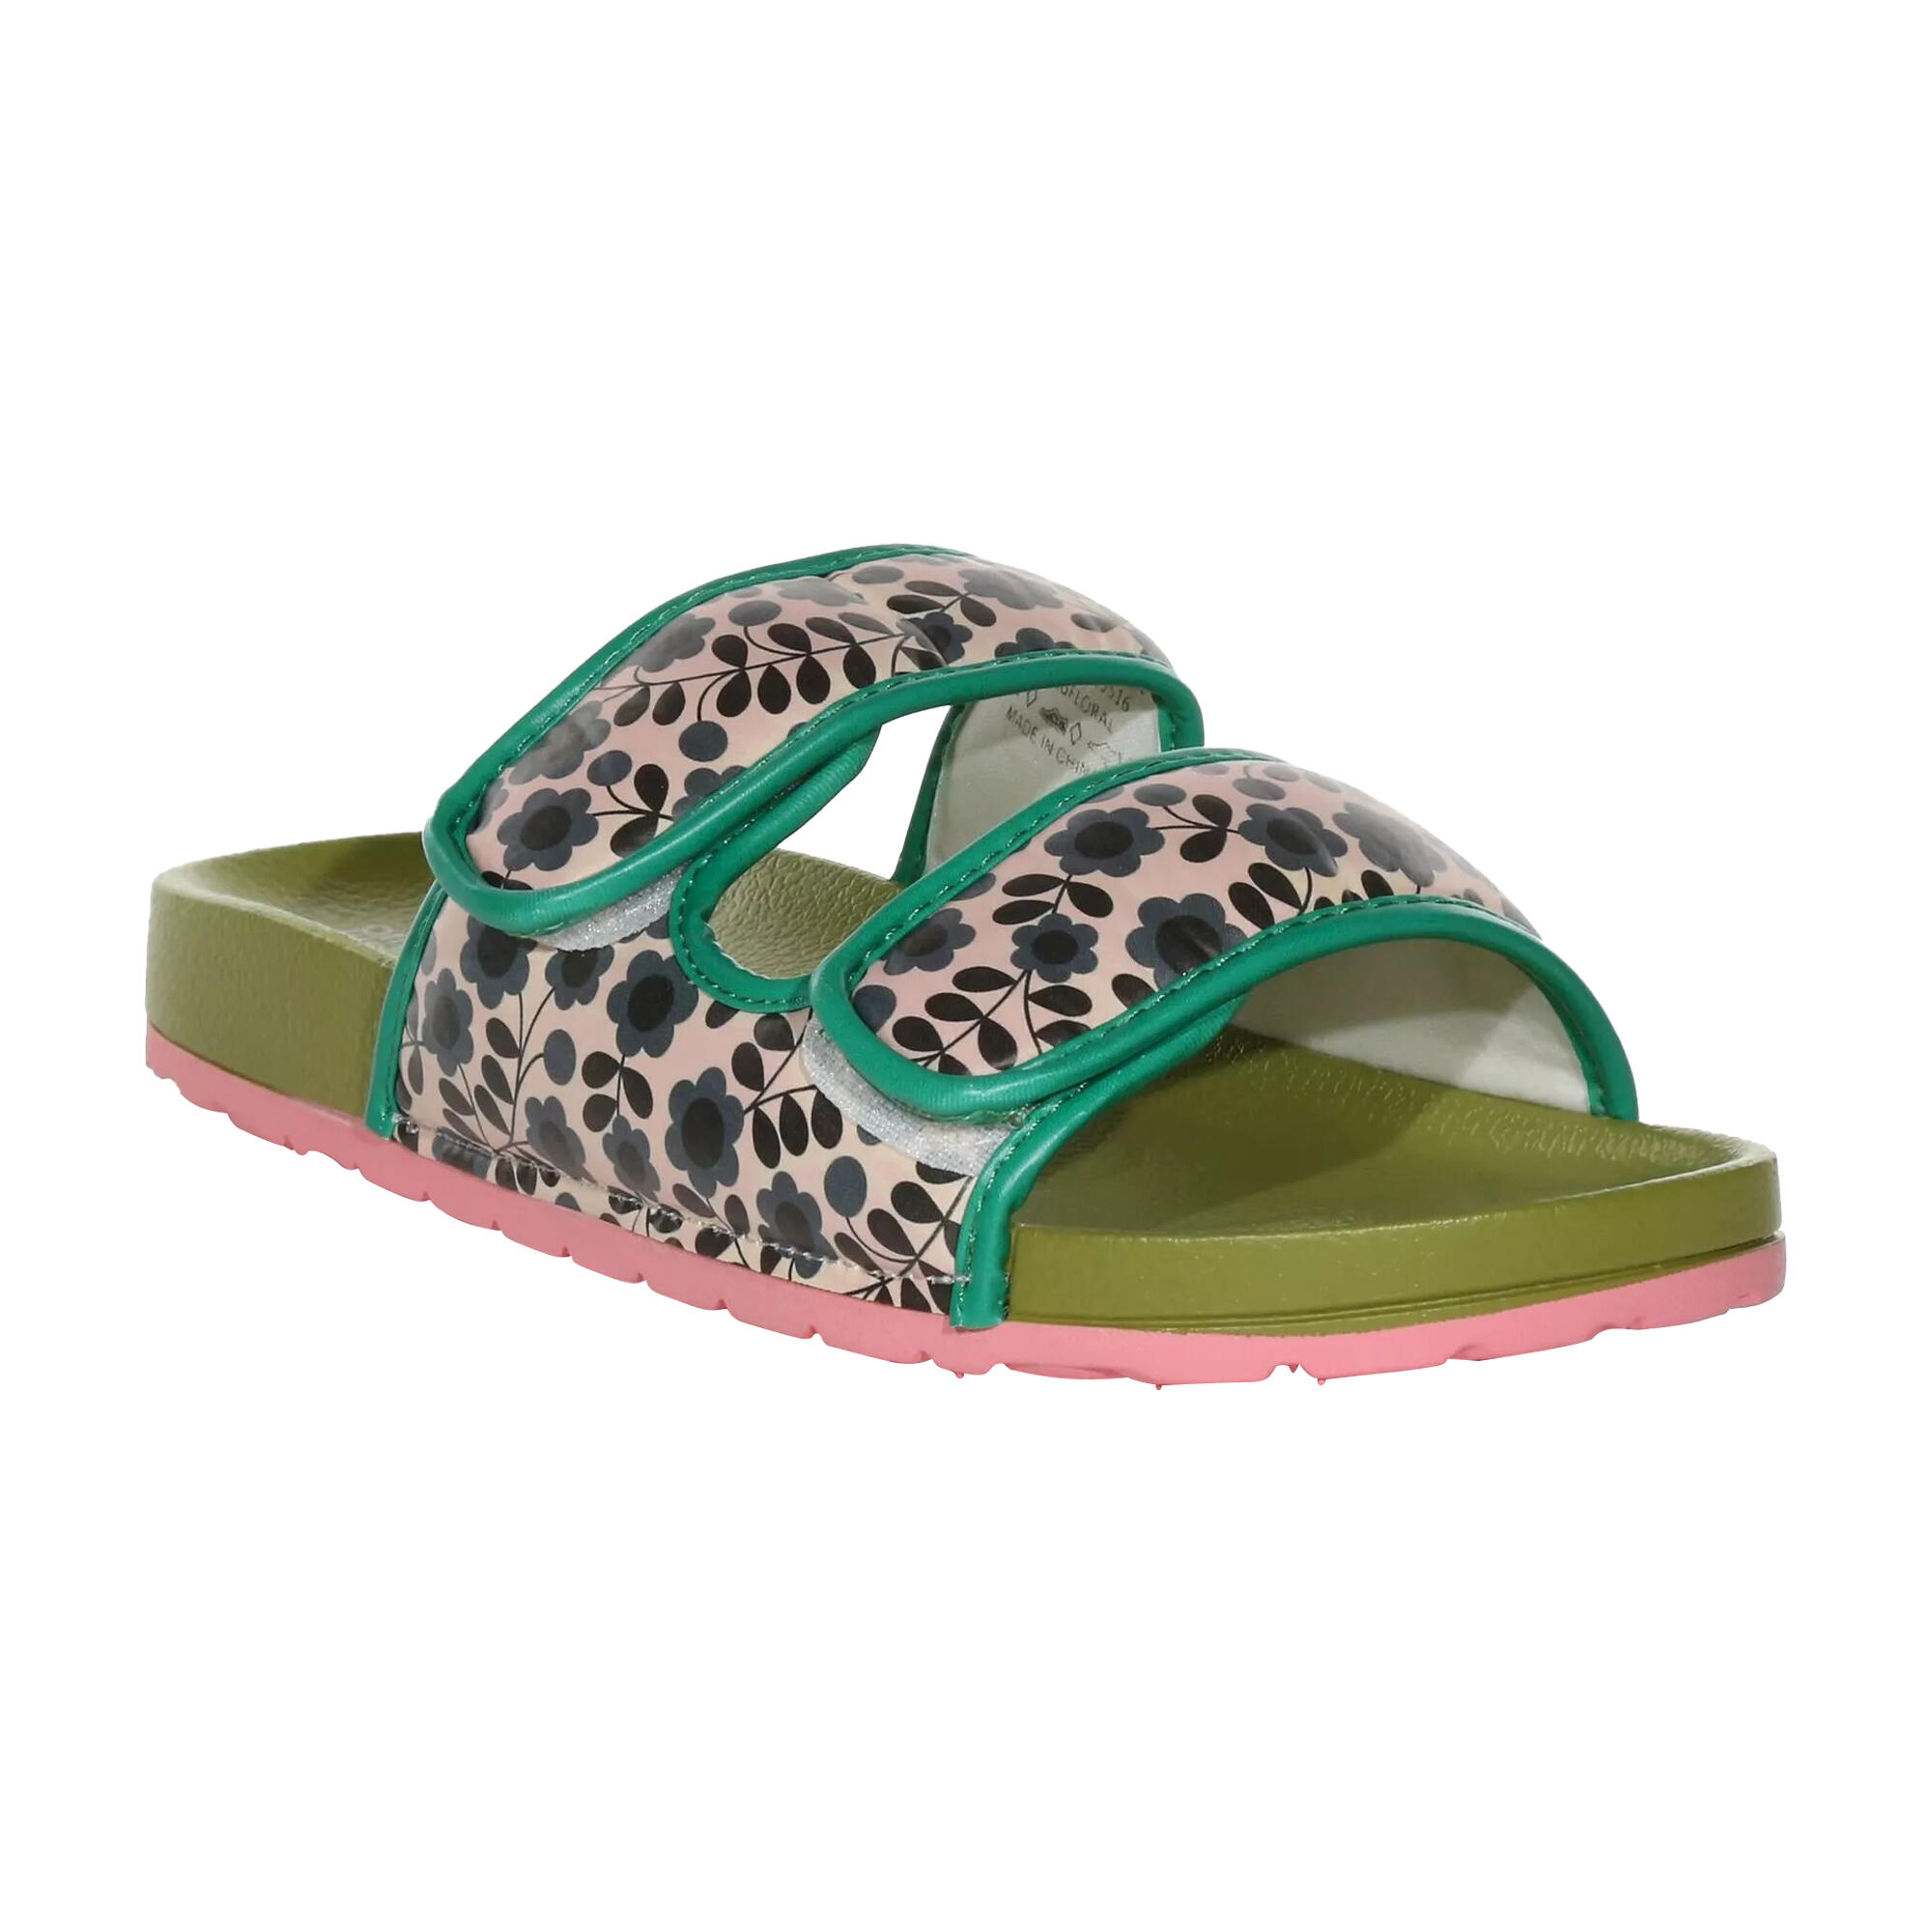 REGATTA Womens/Ladies Orla Twin Floral Moulded Footbed Sandals (Green/Black/Pink)